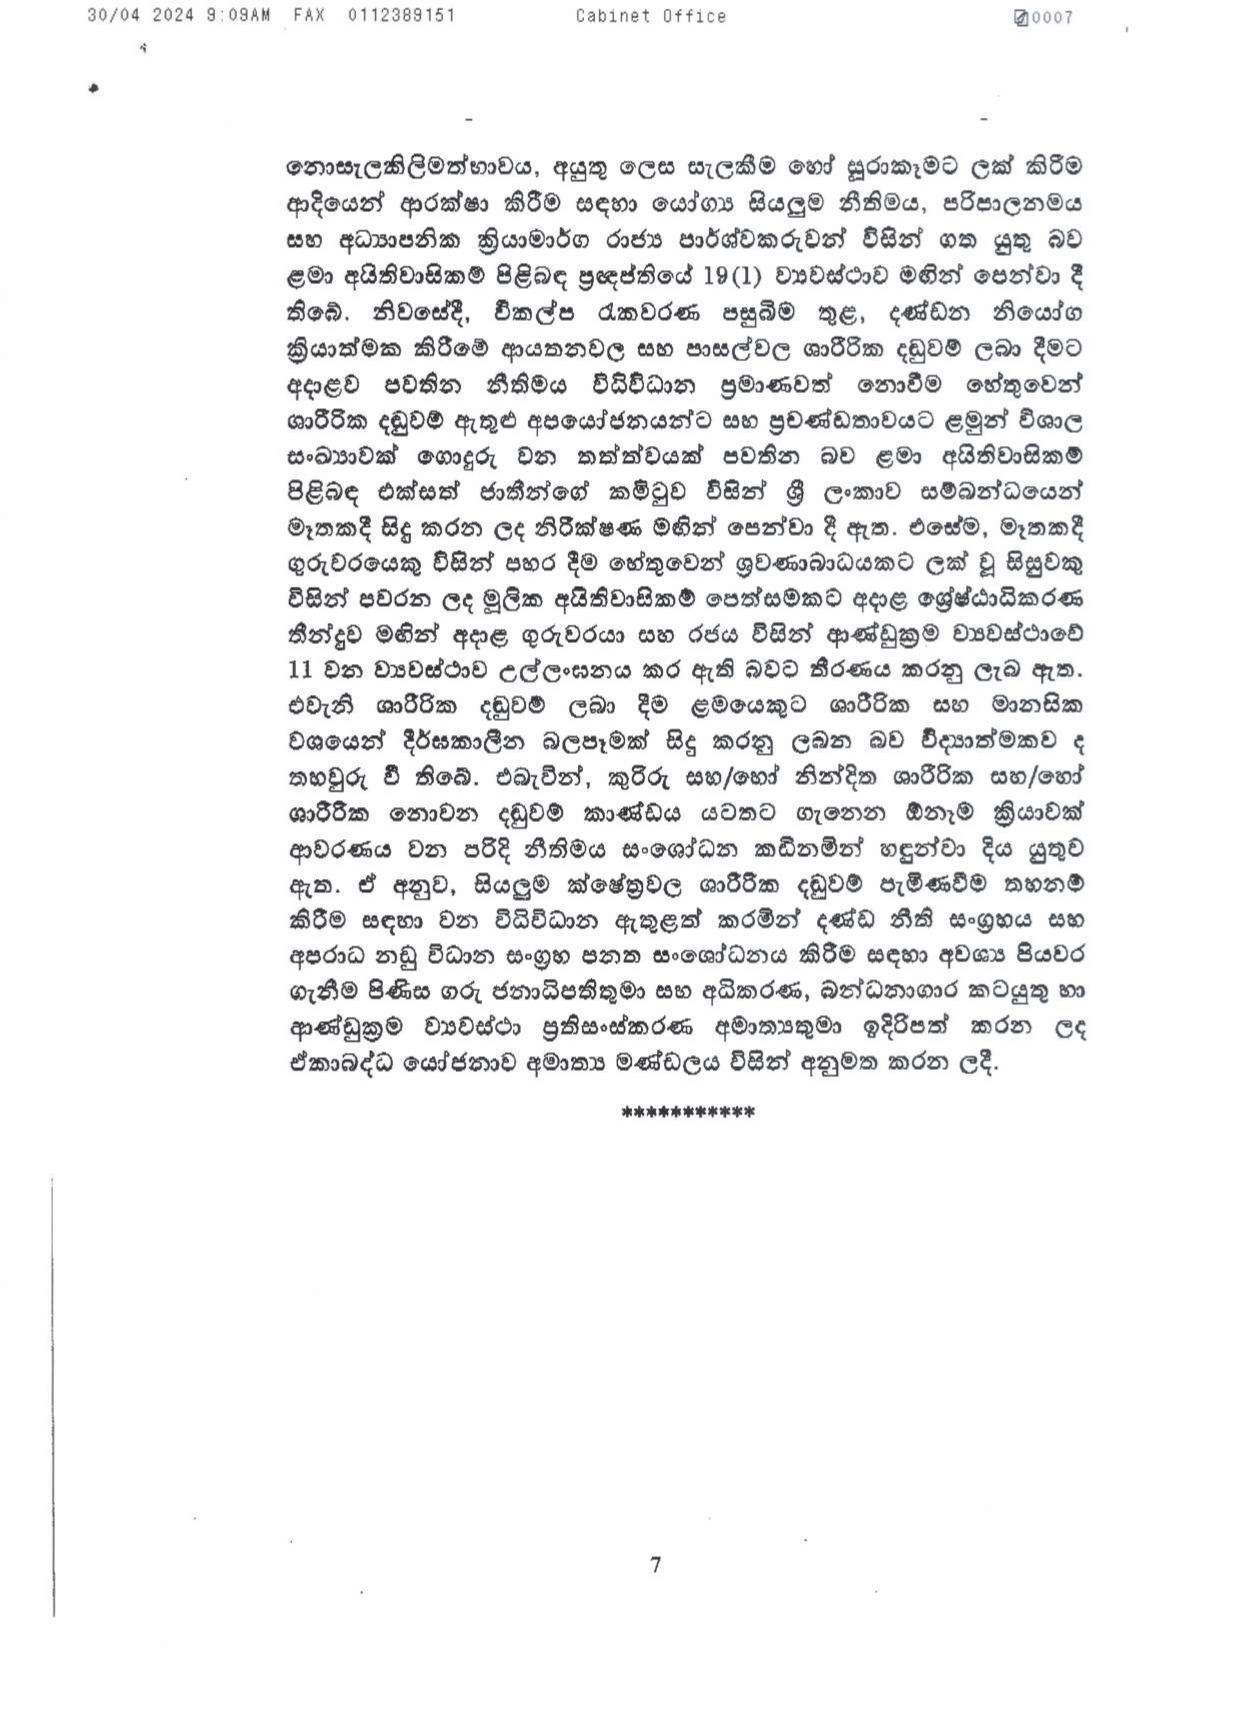 Cabinet Decision on 29.04.2024 page 0007